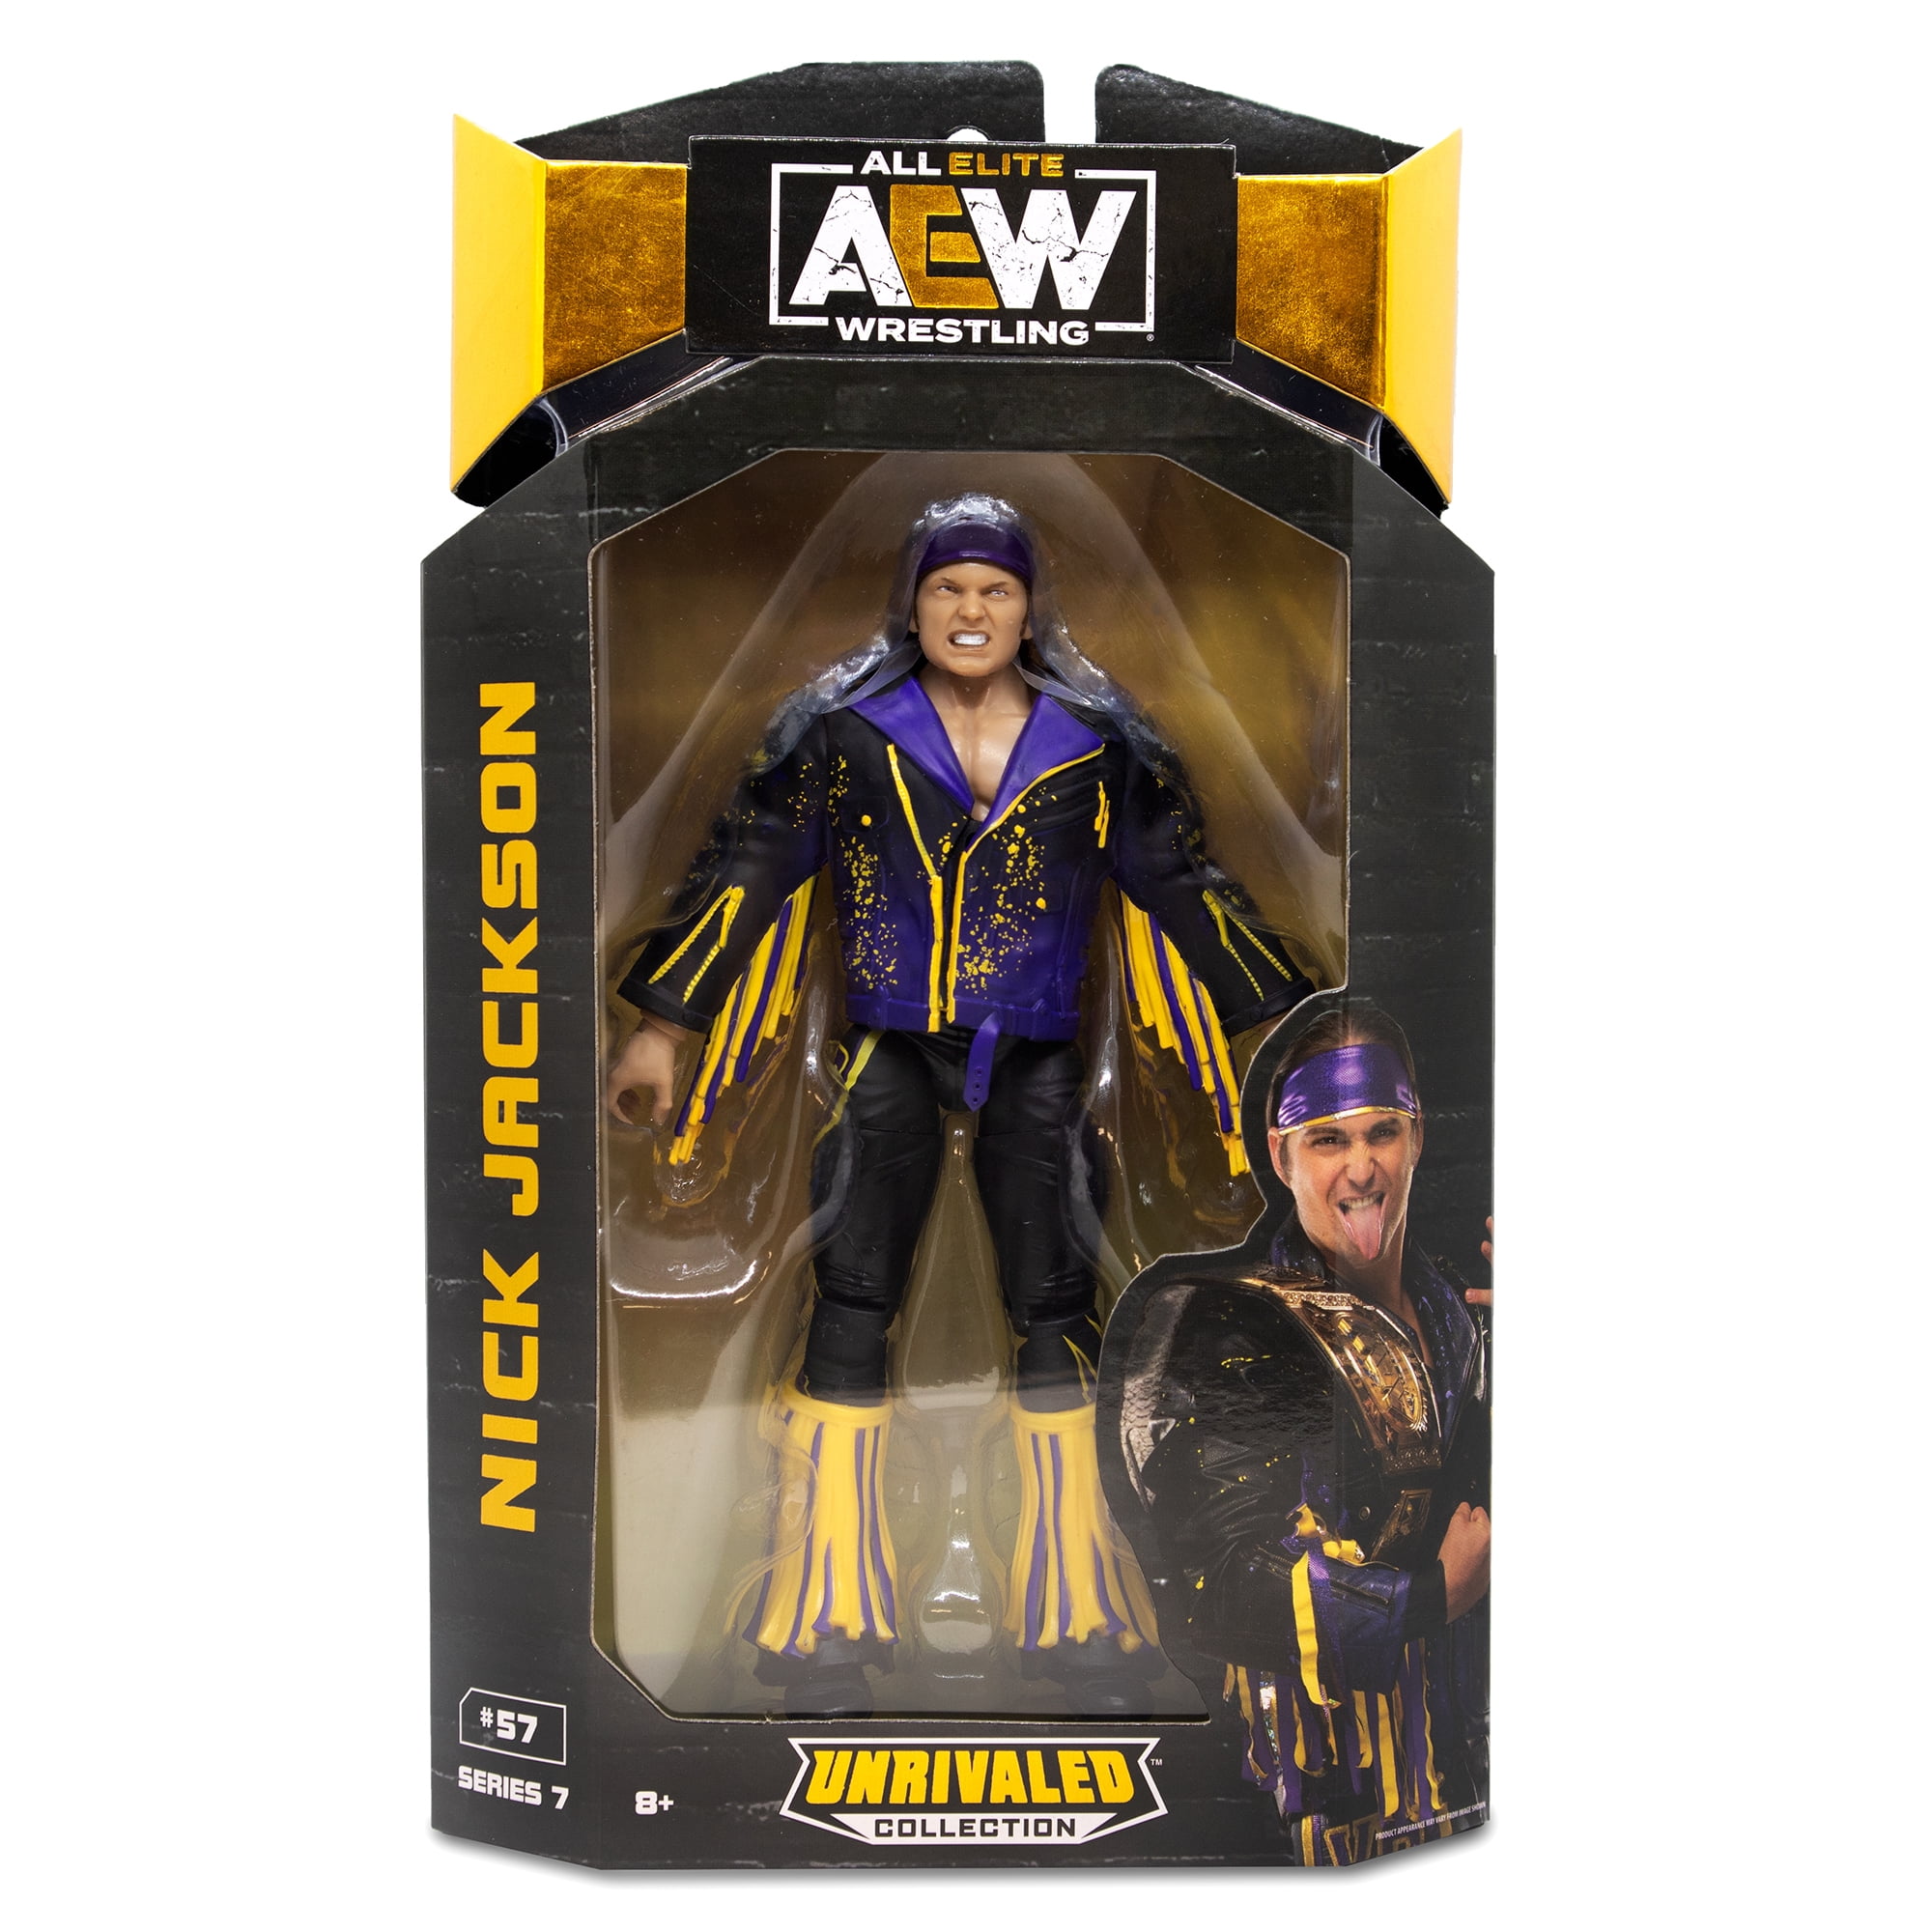  All Elite Wrestling UNRIVALED 2 Pack - The Young Bucks - 6-Inch  Matt Jackson and Nick Jackson Figures with Accessories, Multi -   Exclusive : Everything Else